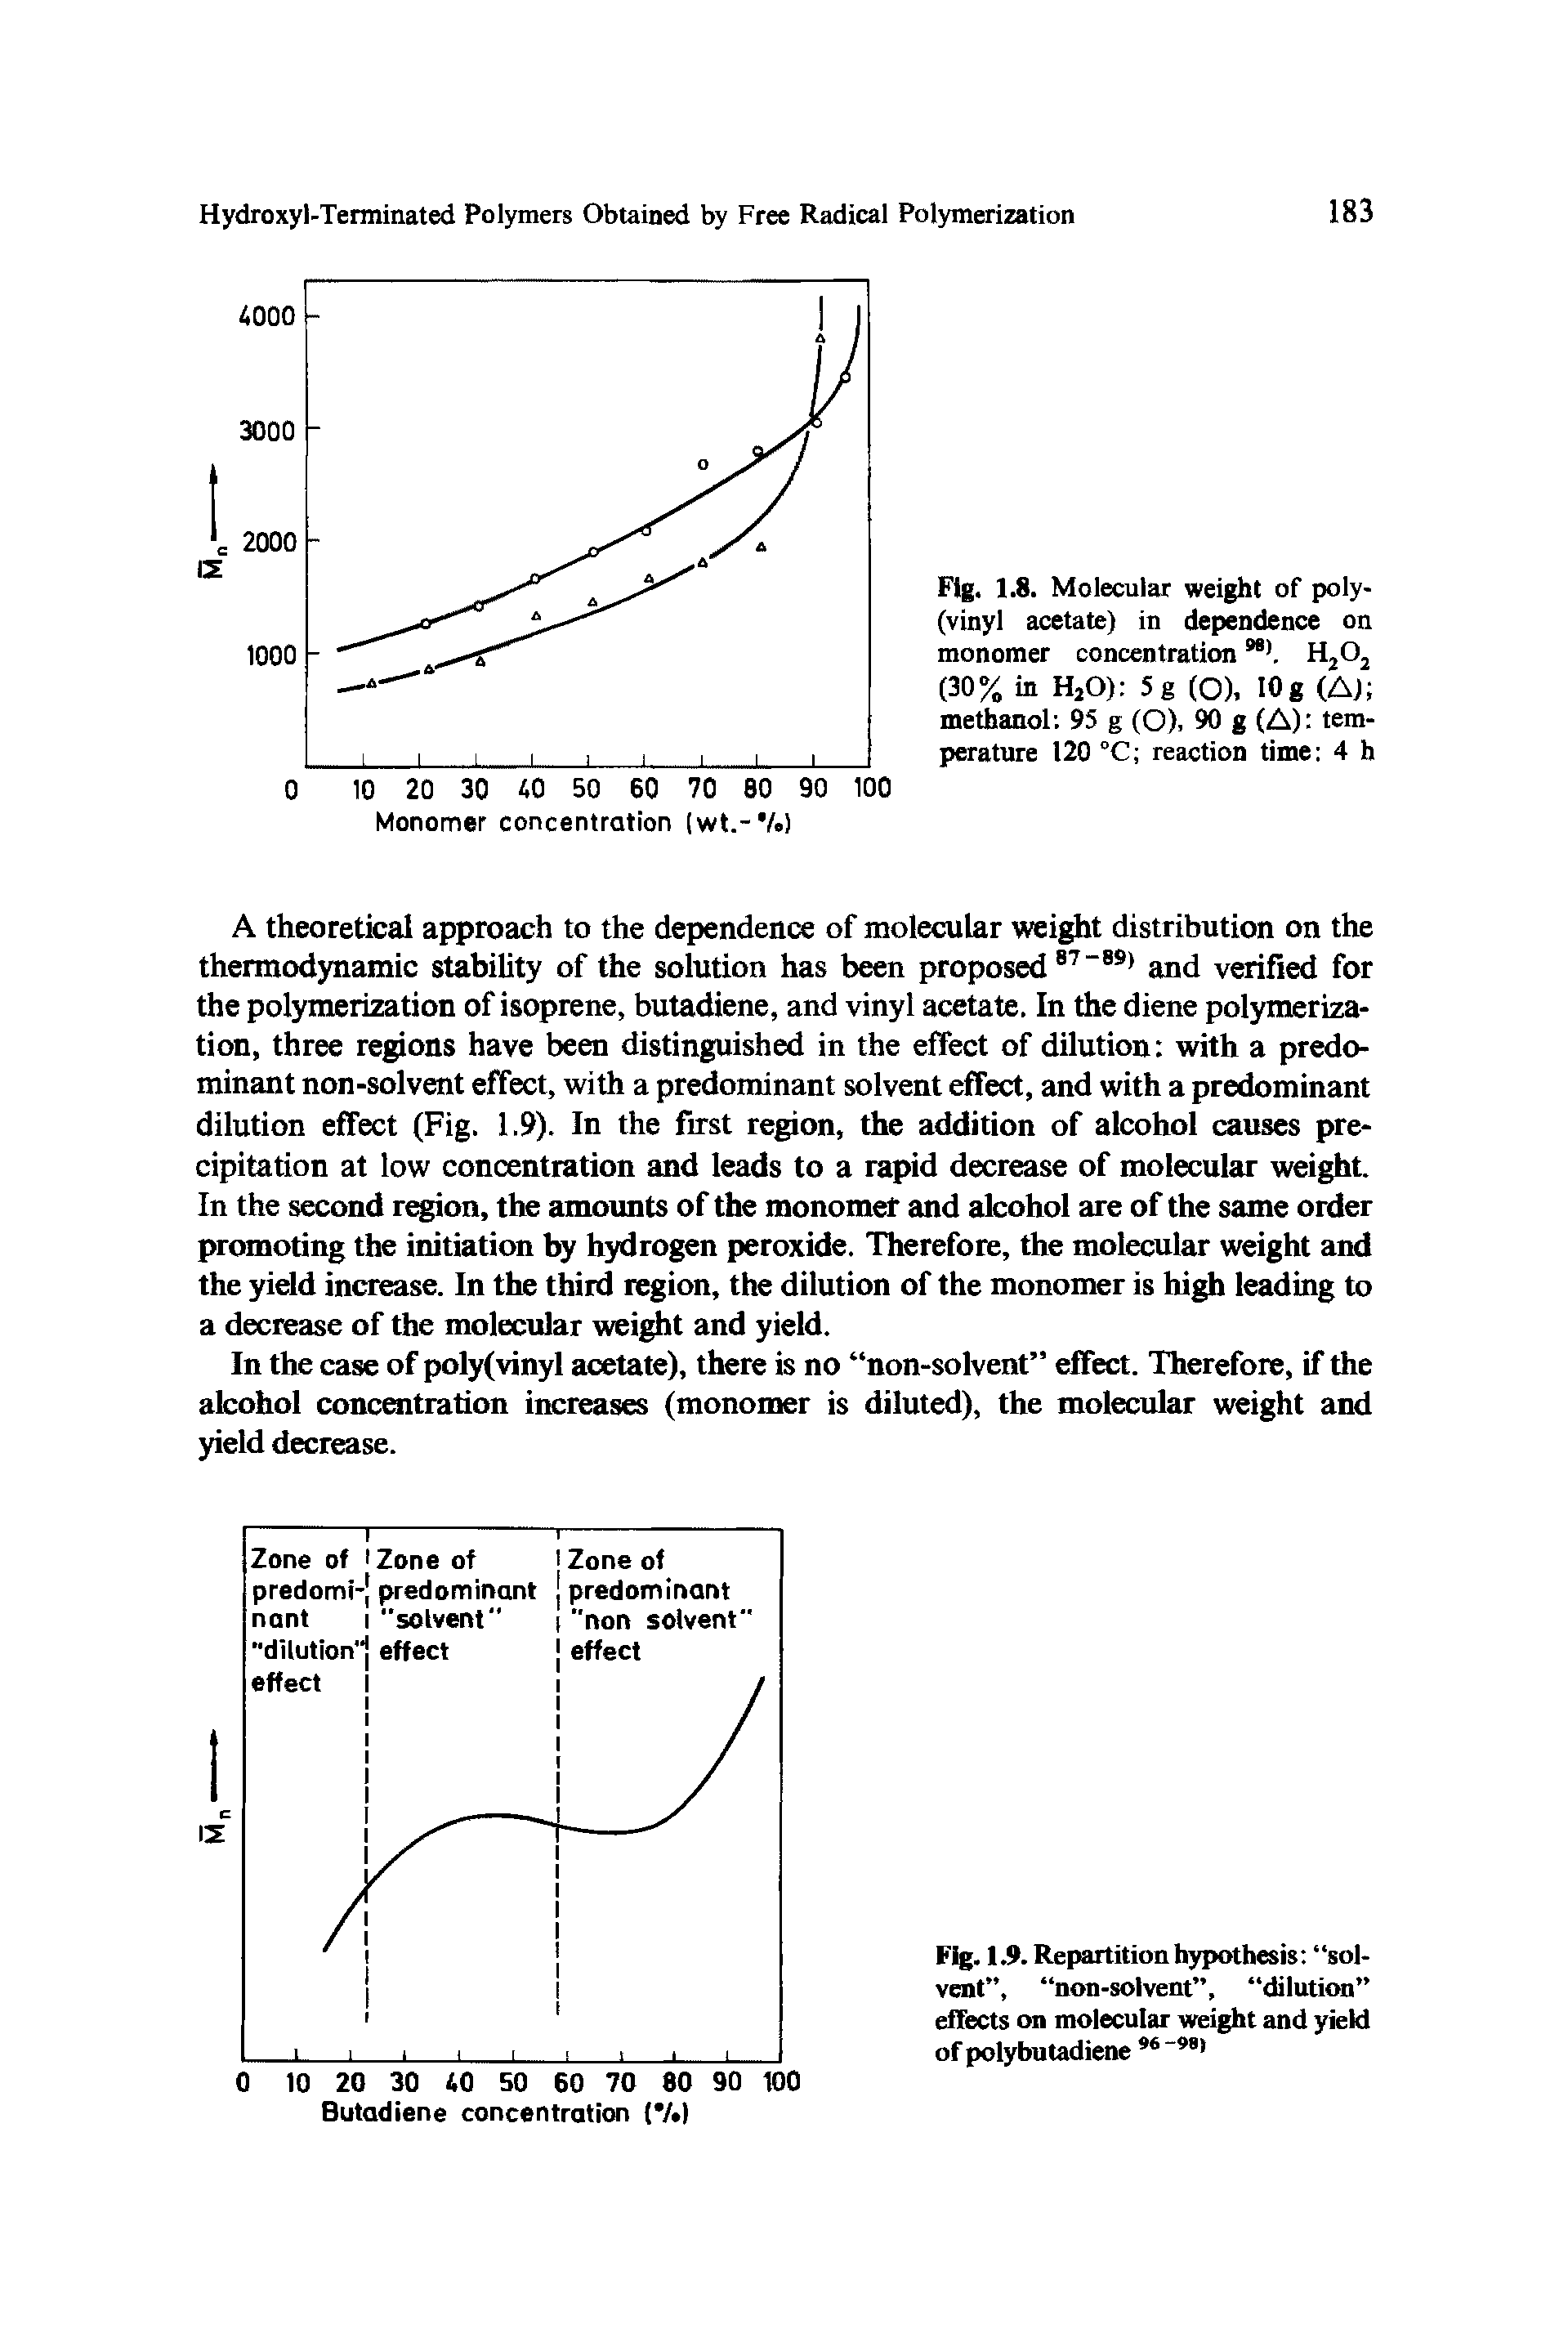 Fig. 1.9. Repartition hypothesis solvent , non-solvent , dilution effects on molecular weight and yield of polybutadiene 96 98 ...